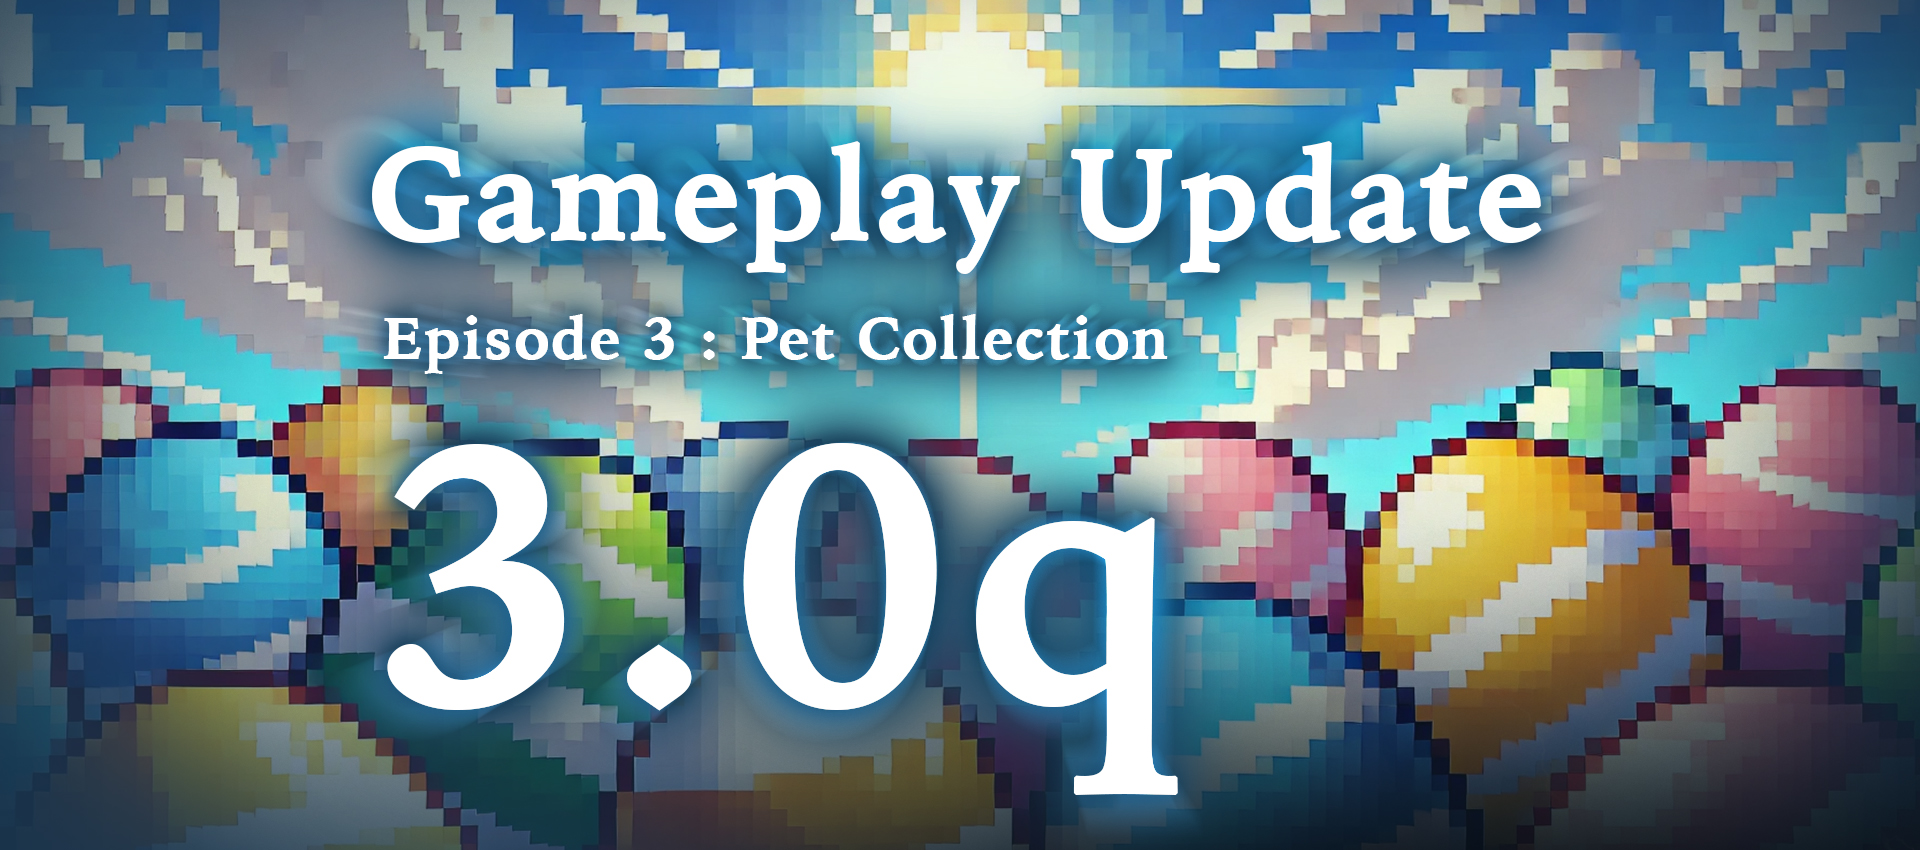 Gameplay Update 3.0q – Pet Collection